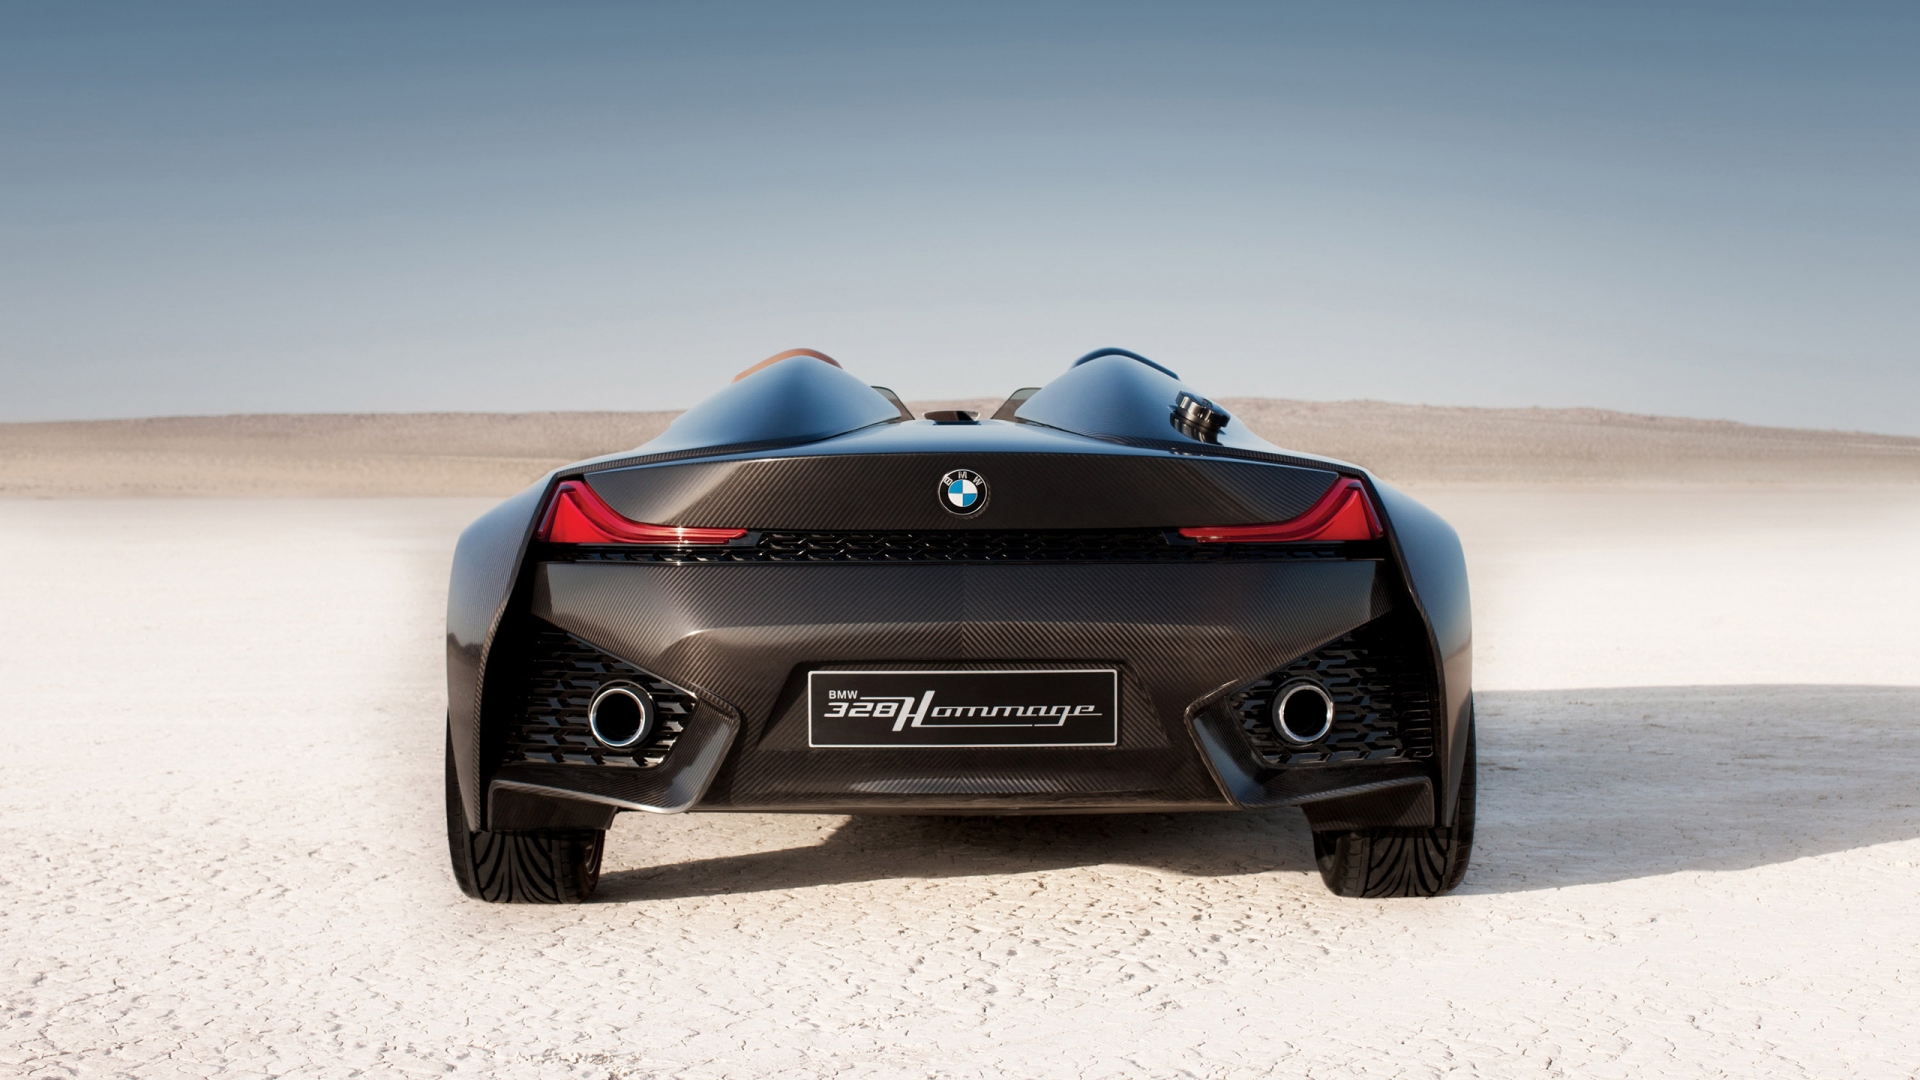 BMW 328 Hommage Rear for 1920 x 1080 HDTV 1080p resolution